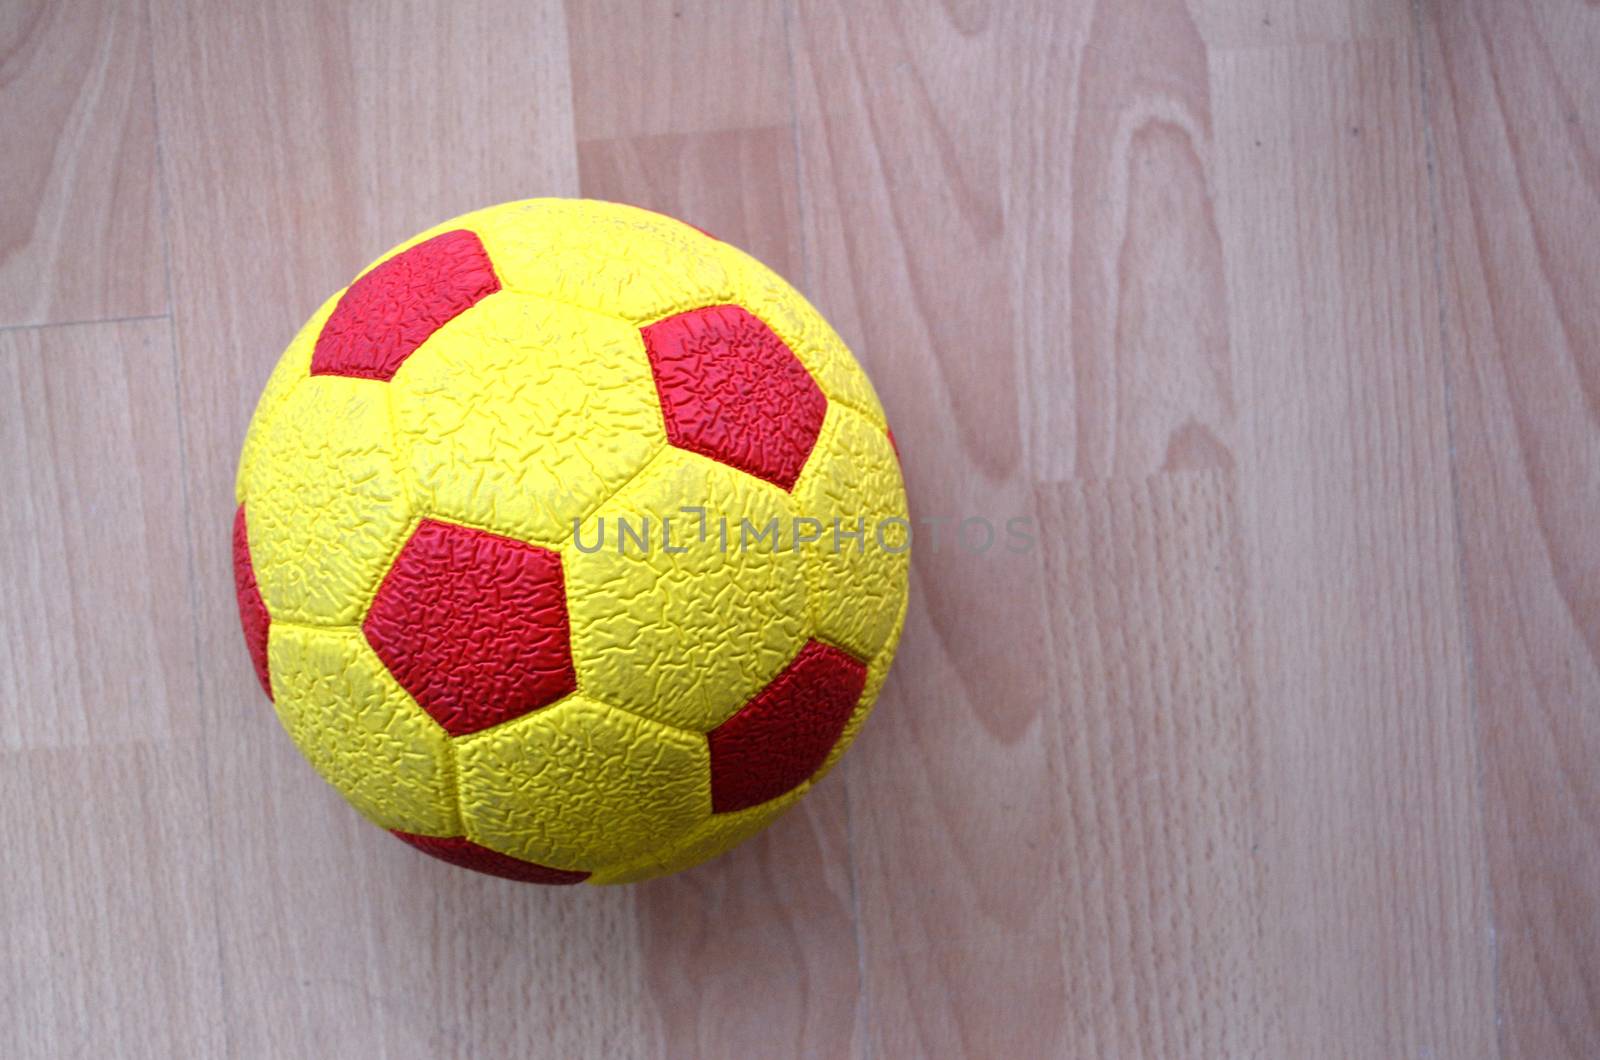 picture of a Red and yellow Soccer Ball on a wooden background